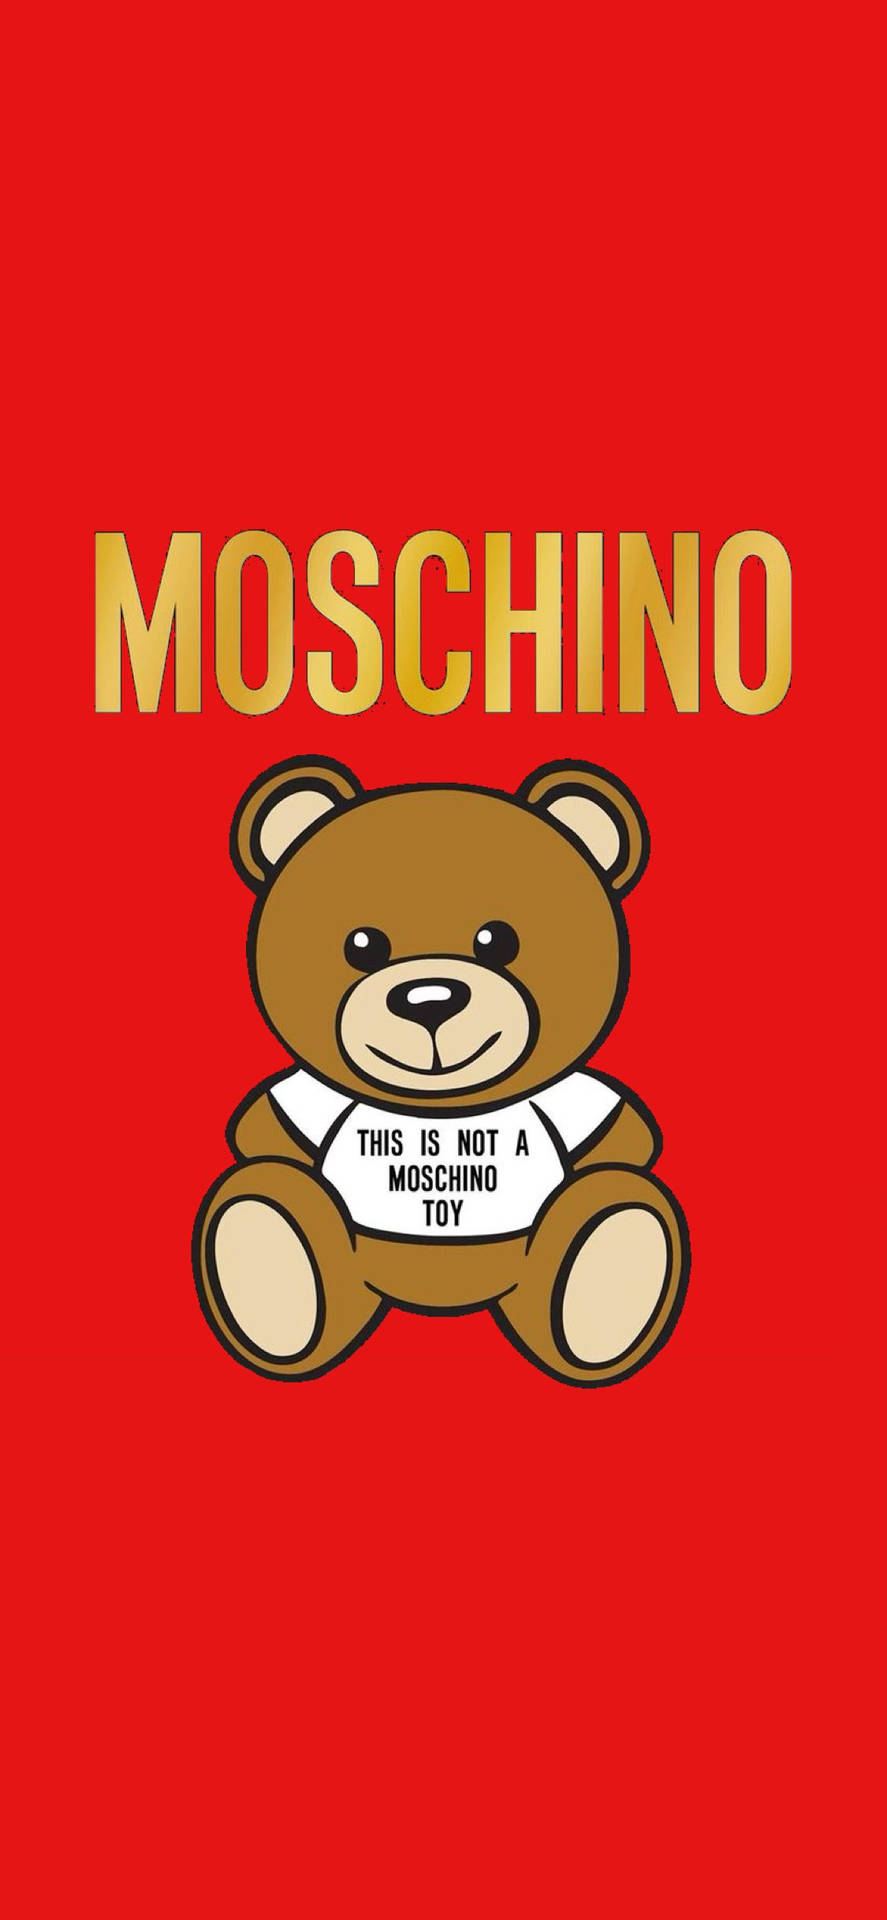 Download Red Background Moschino Bear Wallpaper | Wallpapers.com